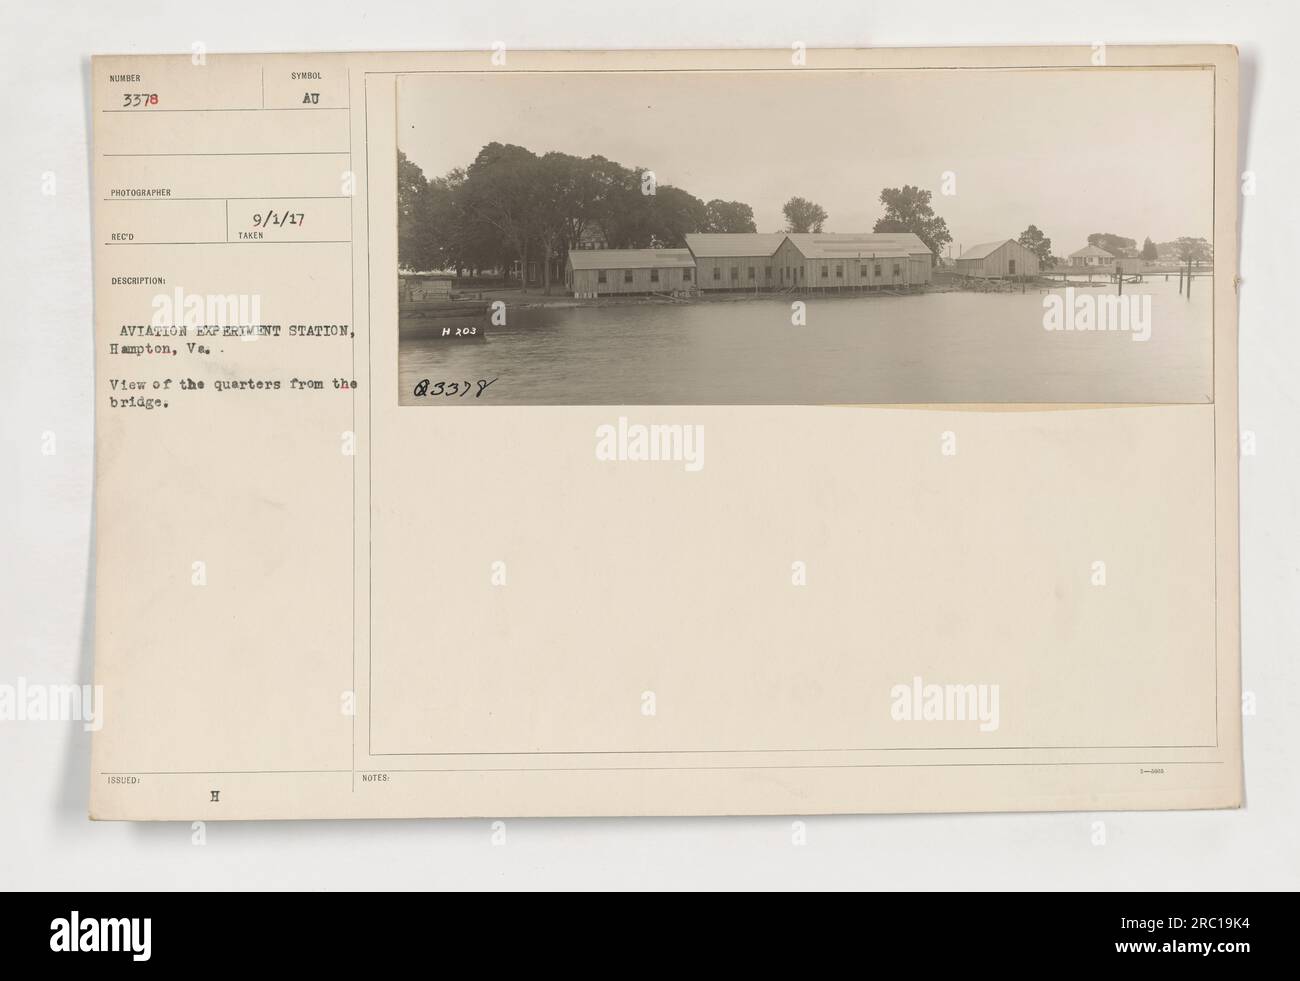 Image of the quarters at the Aviation Experiment Station in Hampton, Virginia. The photo was taken on September 1, 1917. The view is from the bridge. The photo is labeled as SUMBE 3378, and the photographer's name is RECO. The photo is specifically designated as an 'issued' image, and the 'desorption' and 'synol' notations are unclear. Stock Photo